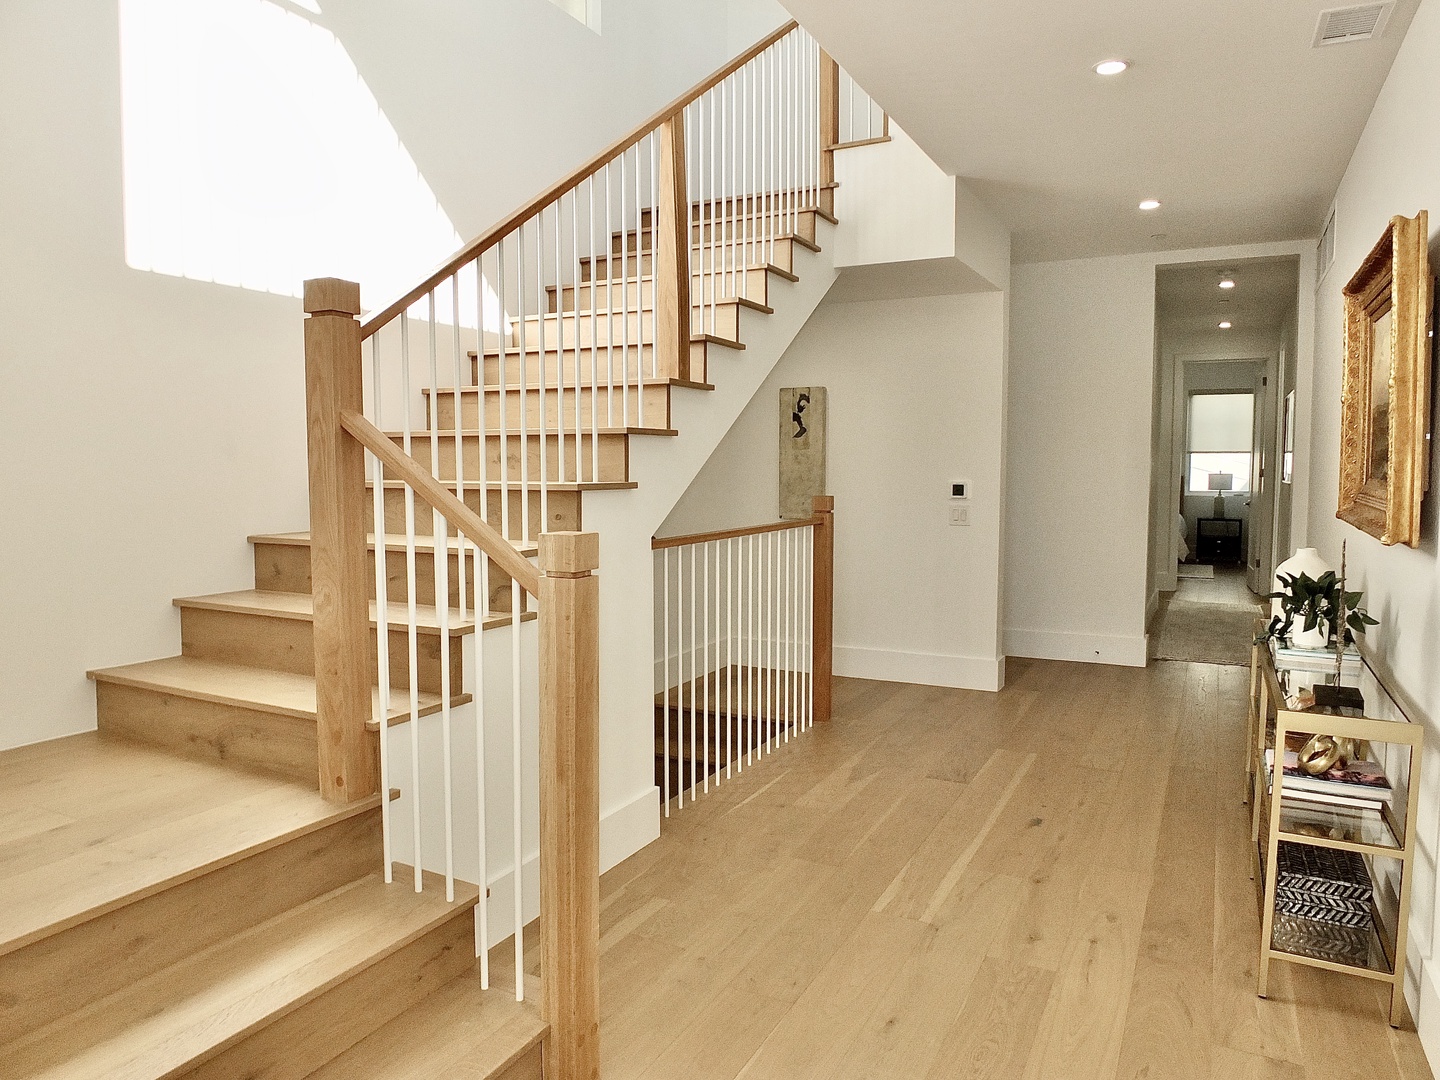 Ascend the breezy staircase to find the spacious third level